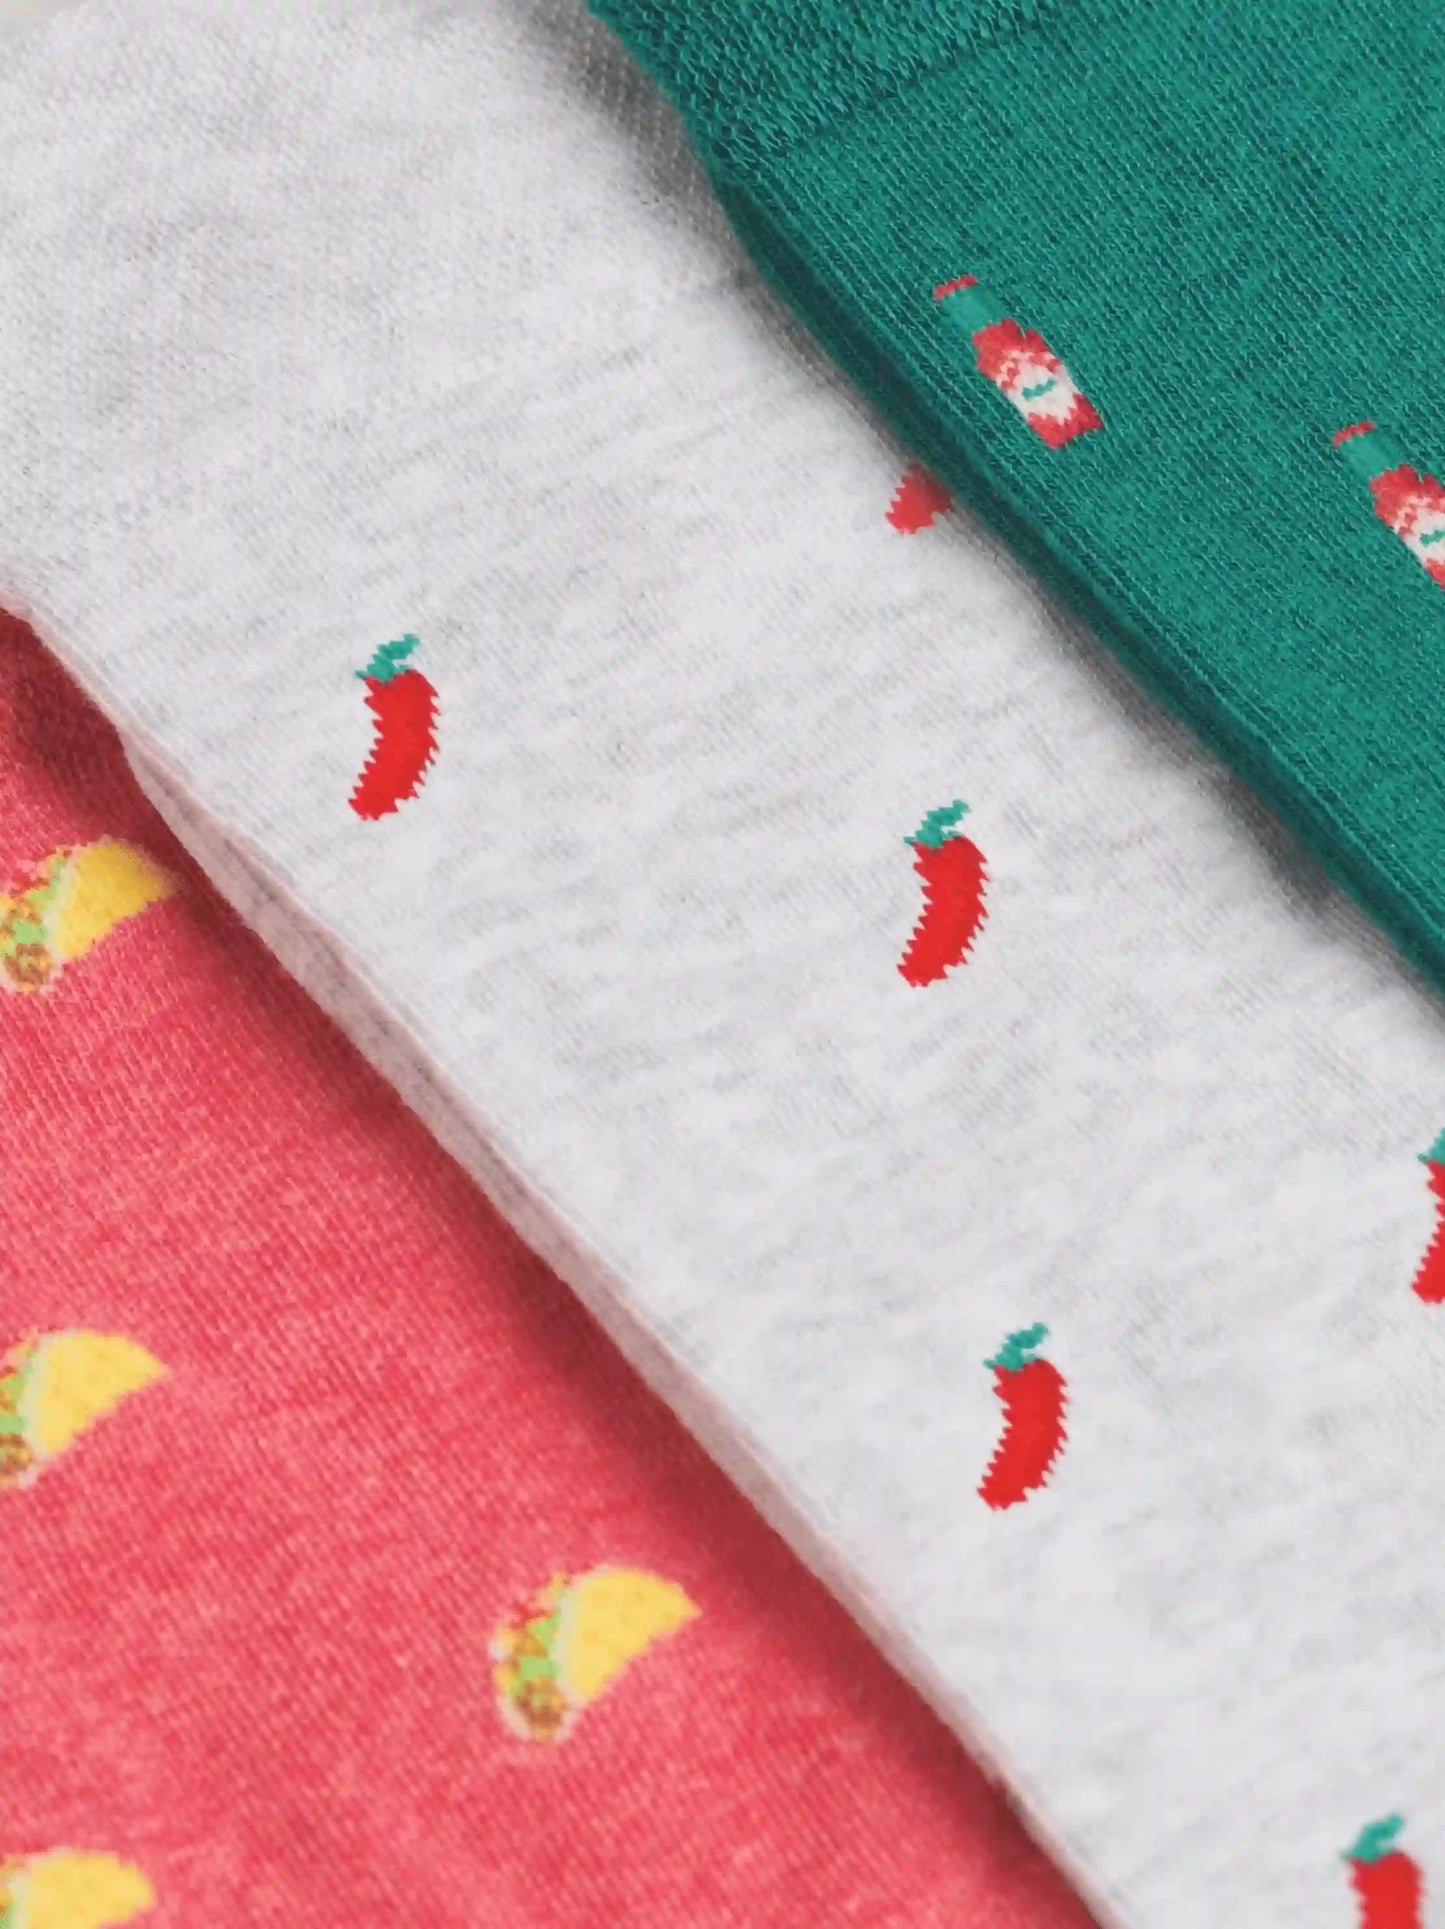 The Spicy Socks Gift Box